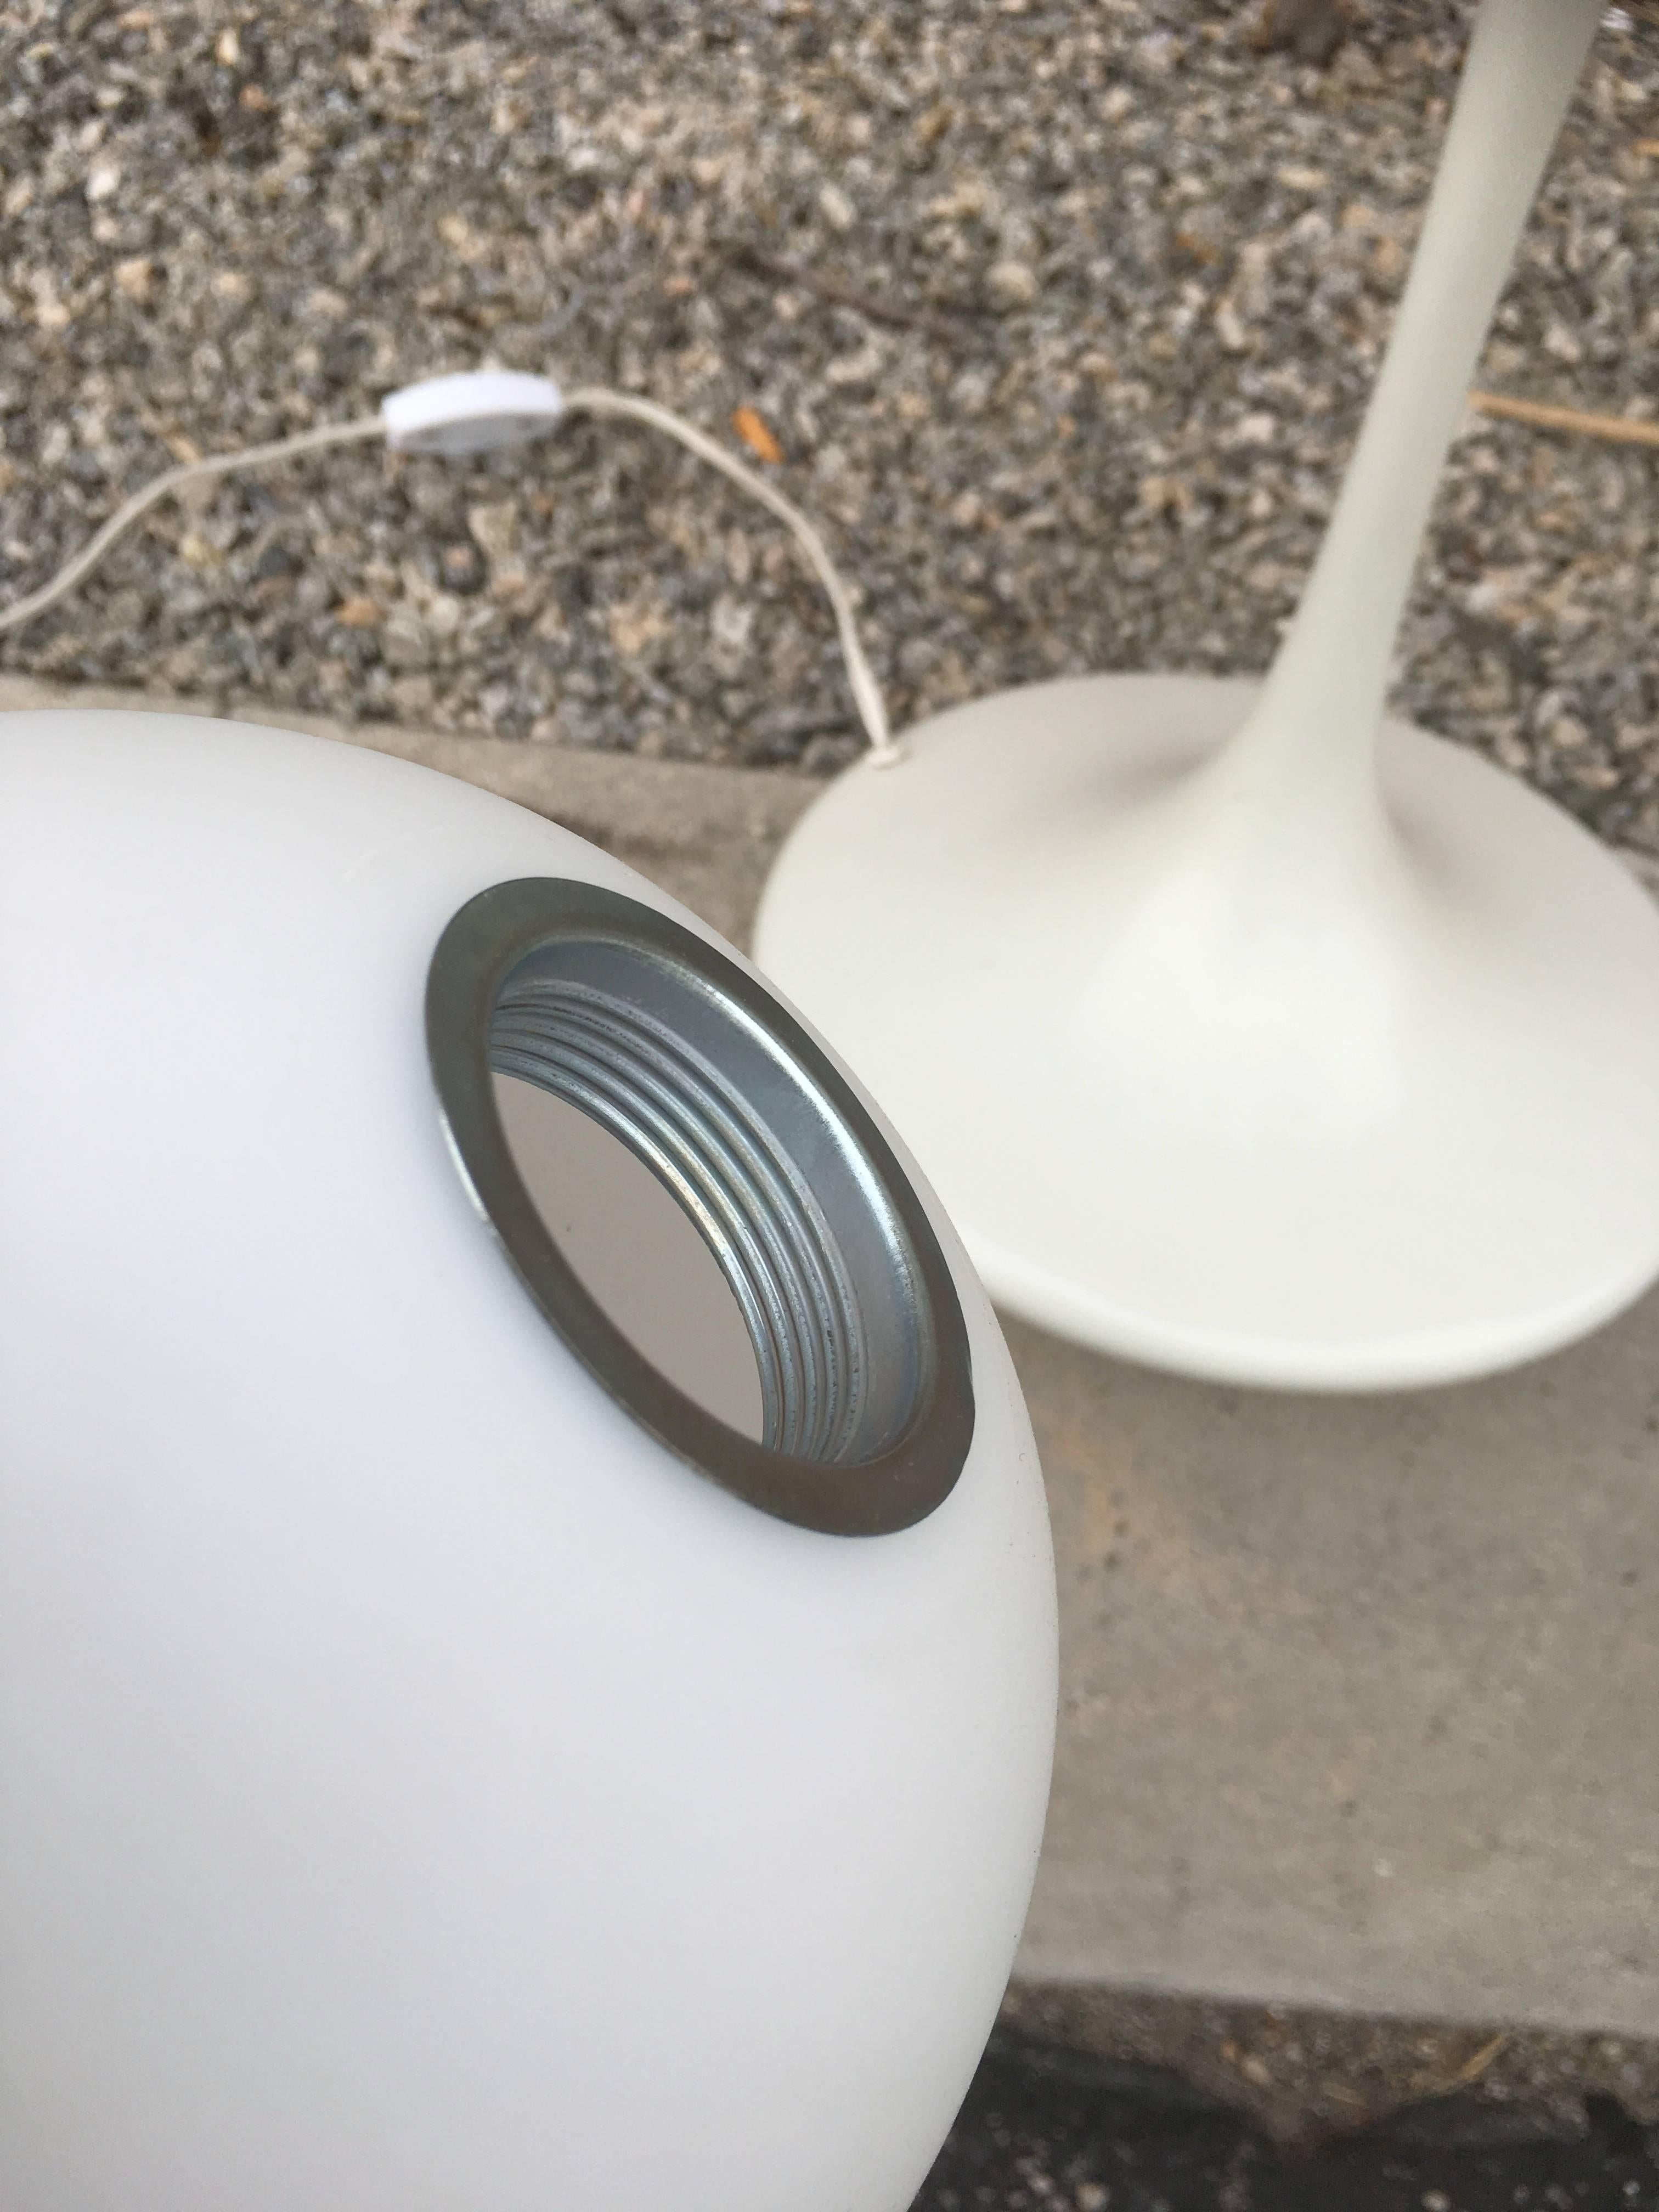 A pristine original max bill balloon lamp in matte white. Large nine globes, each handblown glass bulb screws in the nine sockets. Dimmer switch on orig cord. Handmade in Switzerland, this rare lamp is perfect example of European 1960s Modern. This